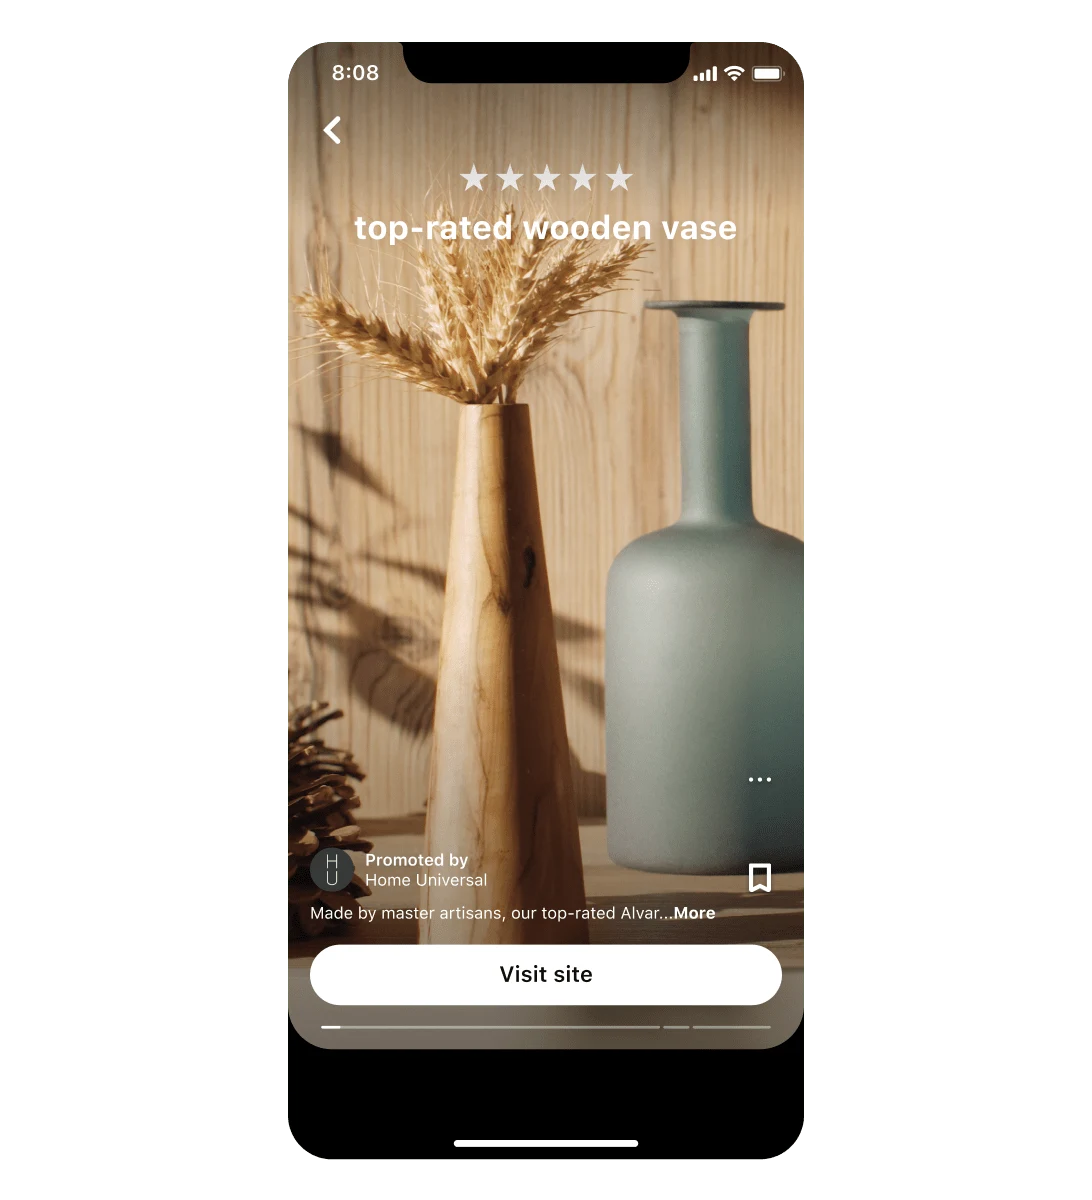 Idea ad by Home Universal for their top-rated wooden vase, shown on a mobile screen. A five-star rating is shown on top.